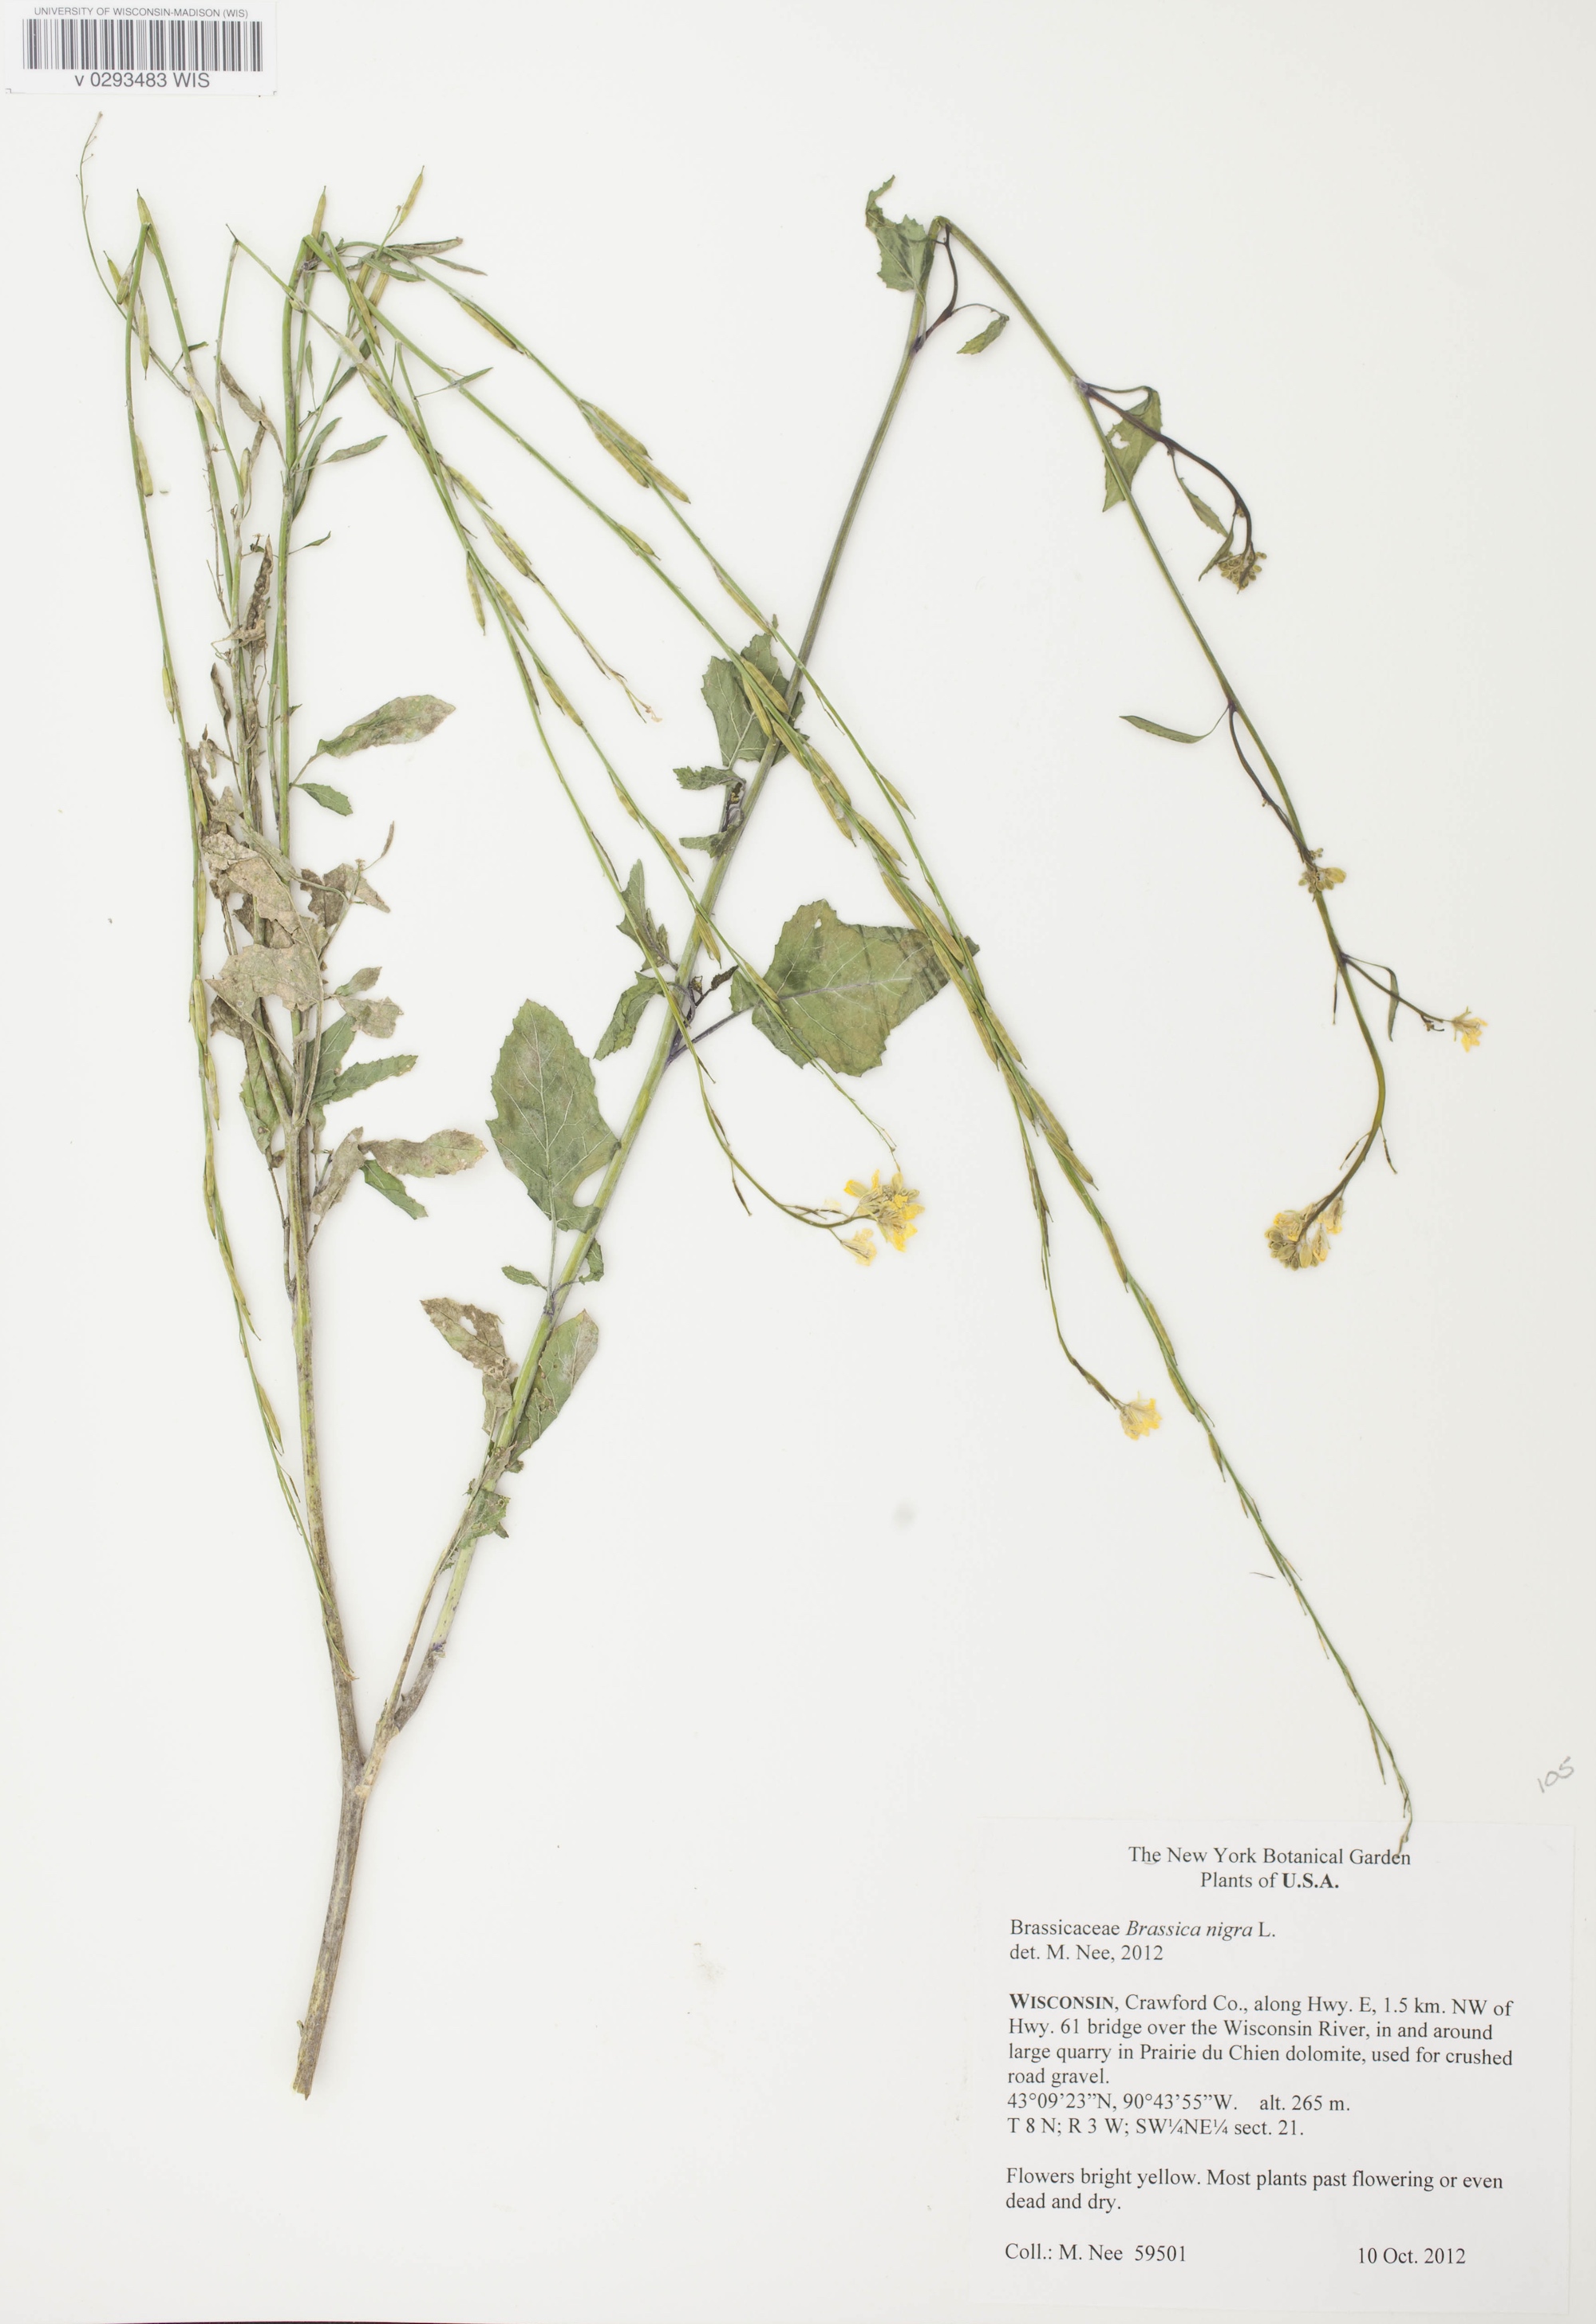 Black Mustard specimen collected near Pairie du Chien on Highway E in Crawford County, Wisconsin on October 10, 2012.